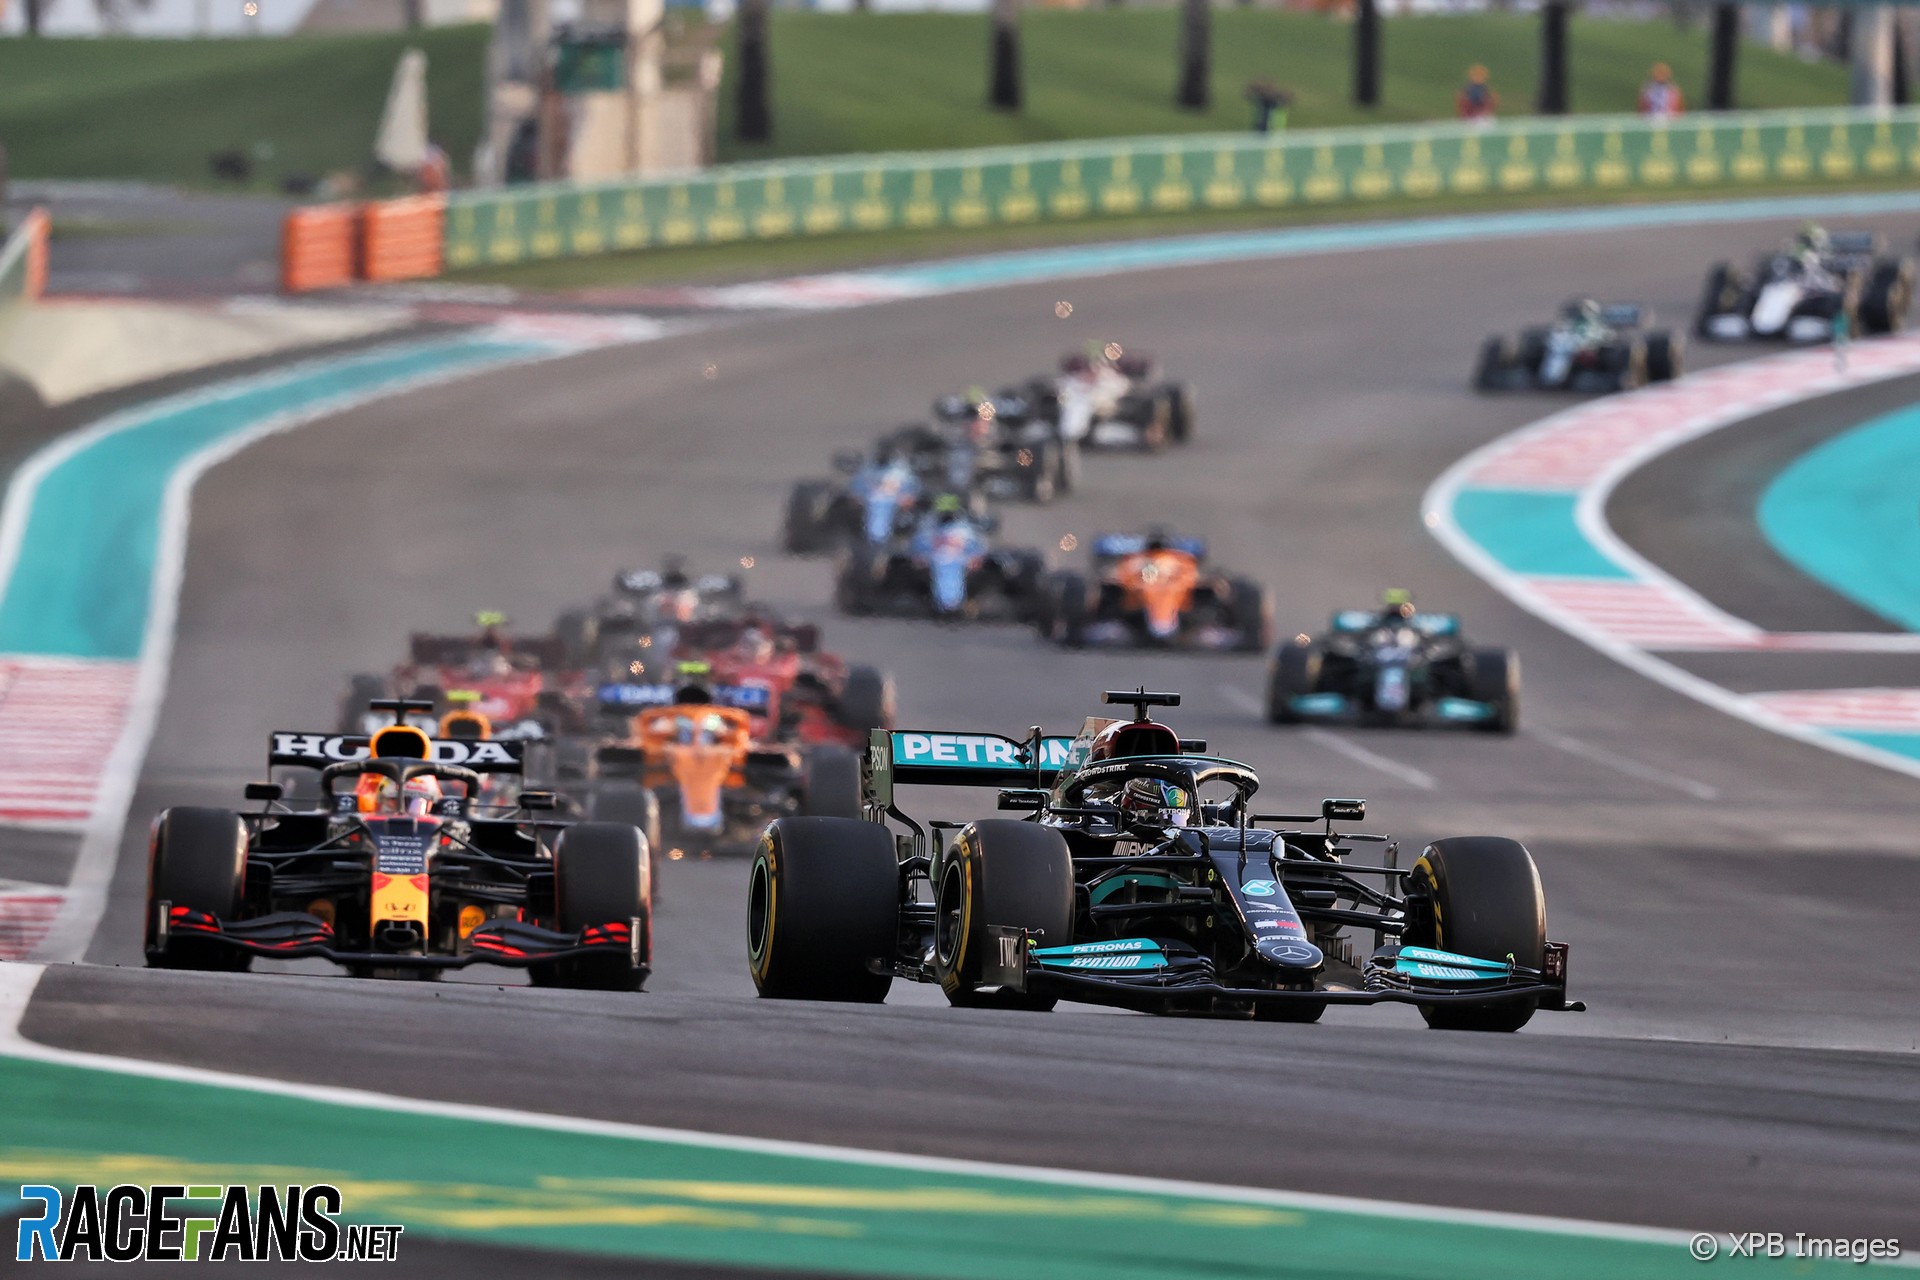 Over 100 million people watched F1's 2021 season finale · RaceFans